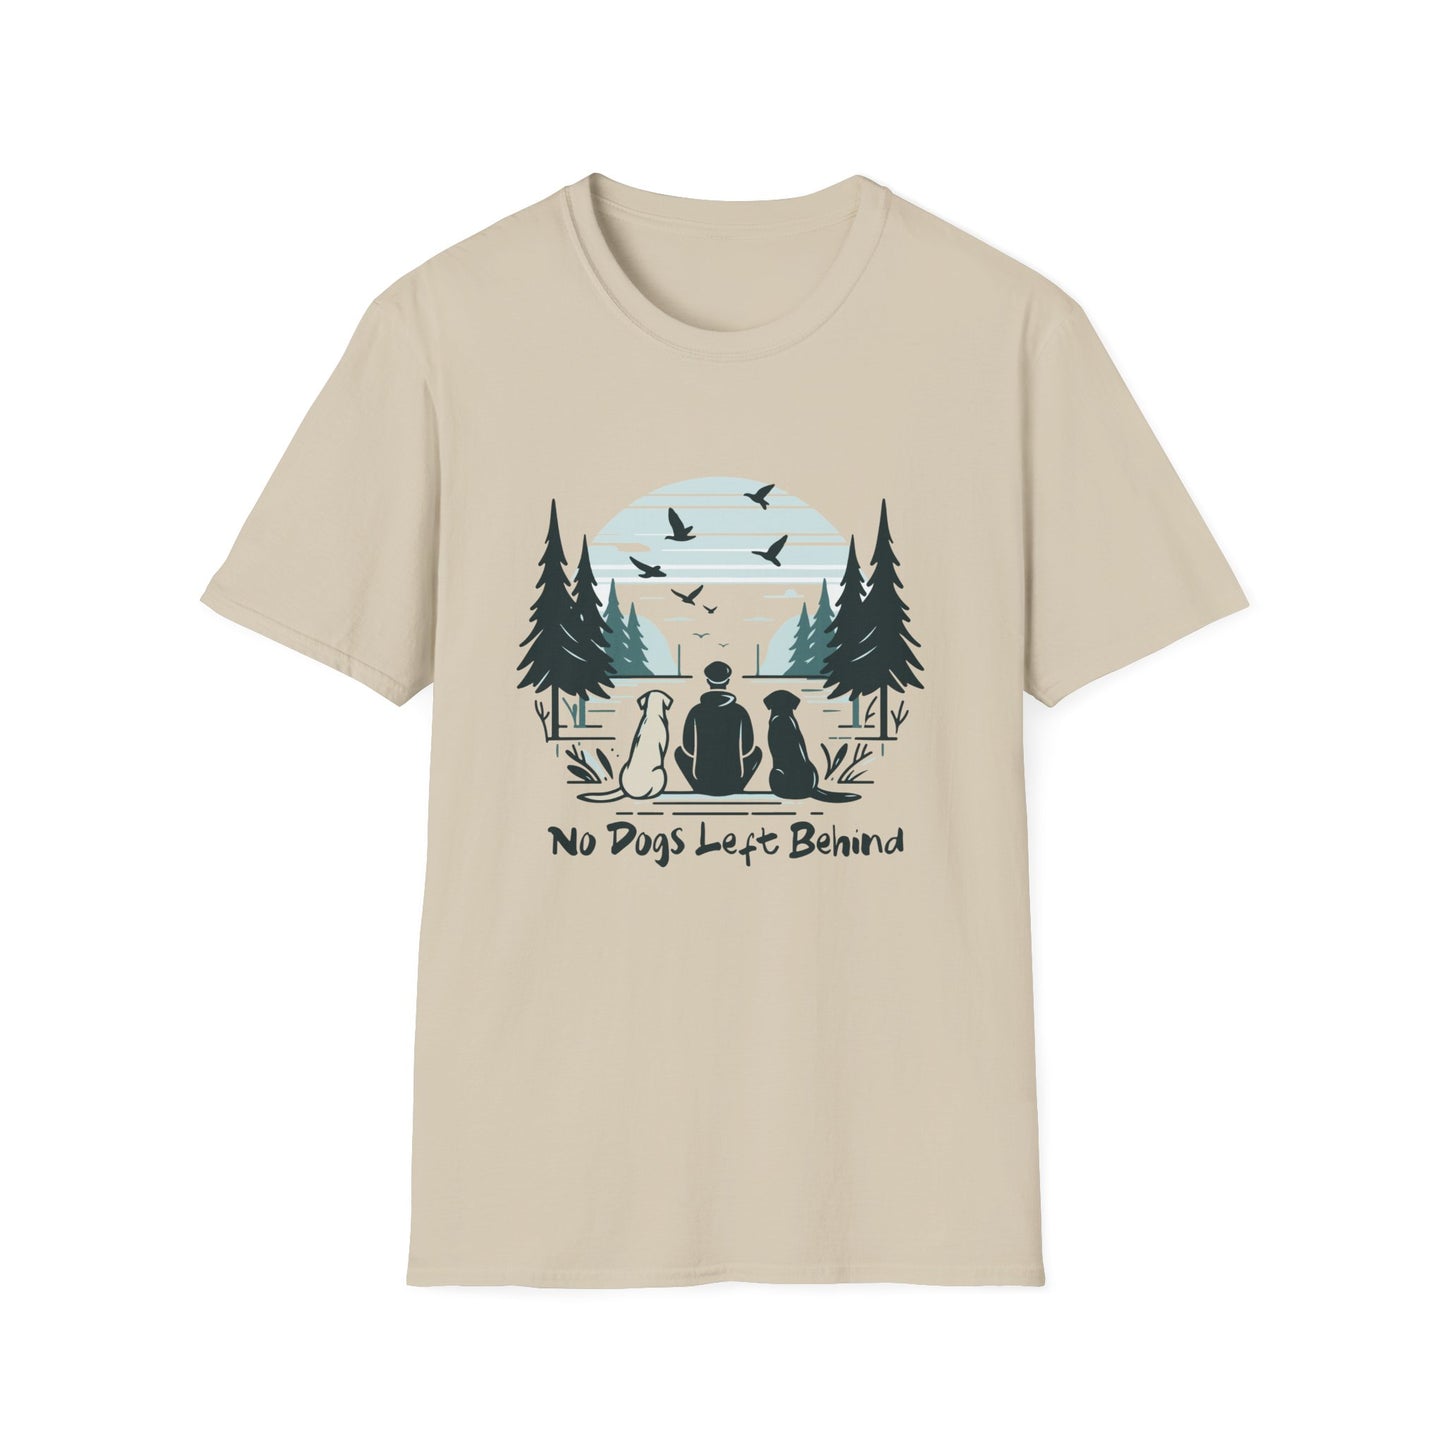 4 No Dogs Left Behind - Unisex Softstyle T-Shirt